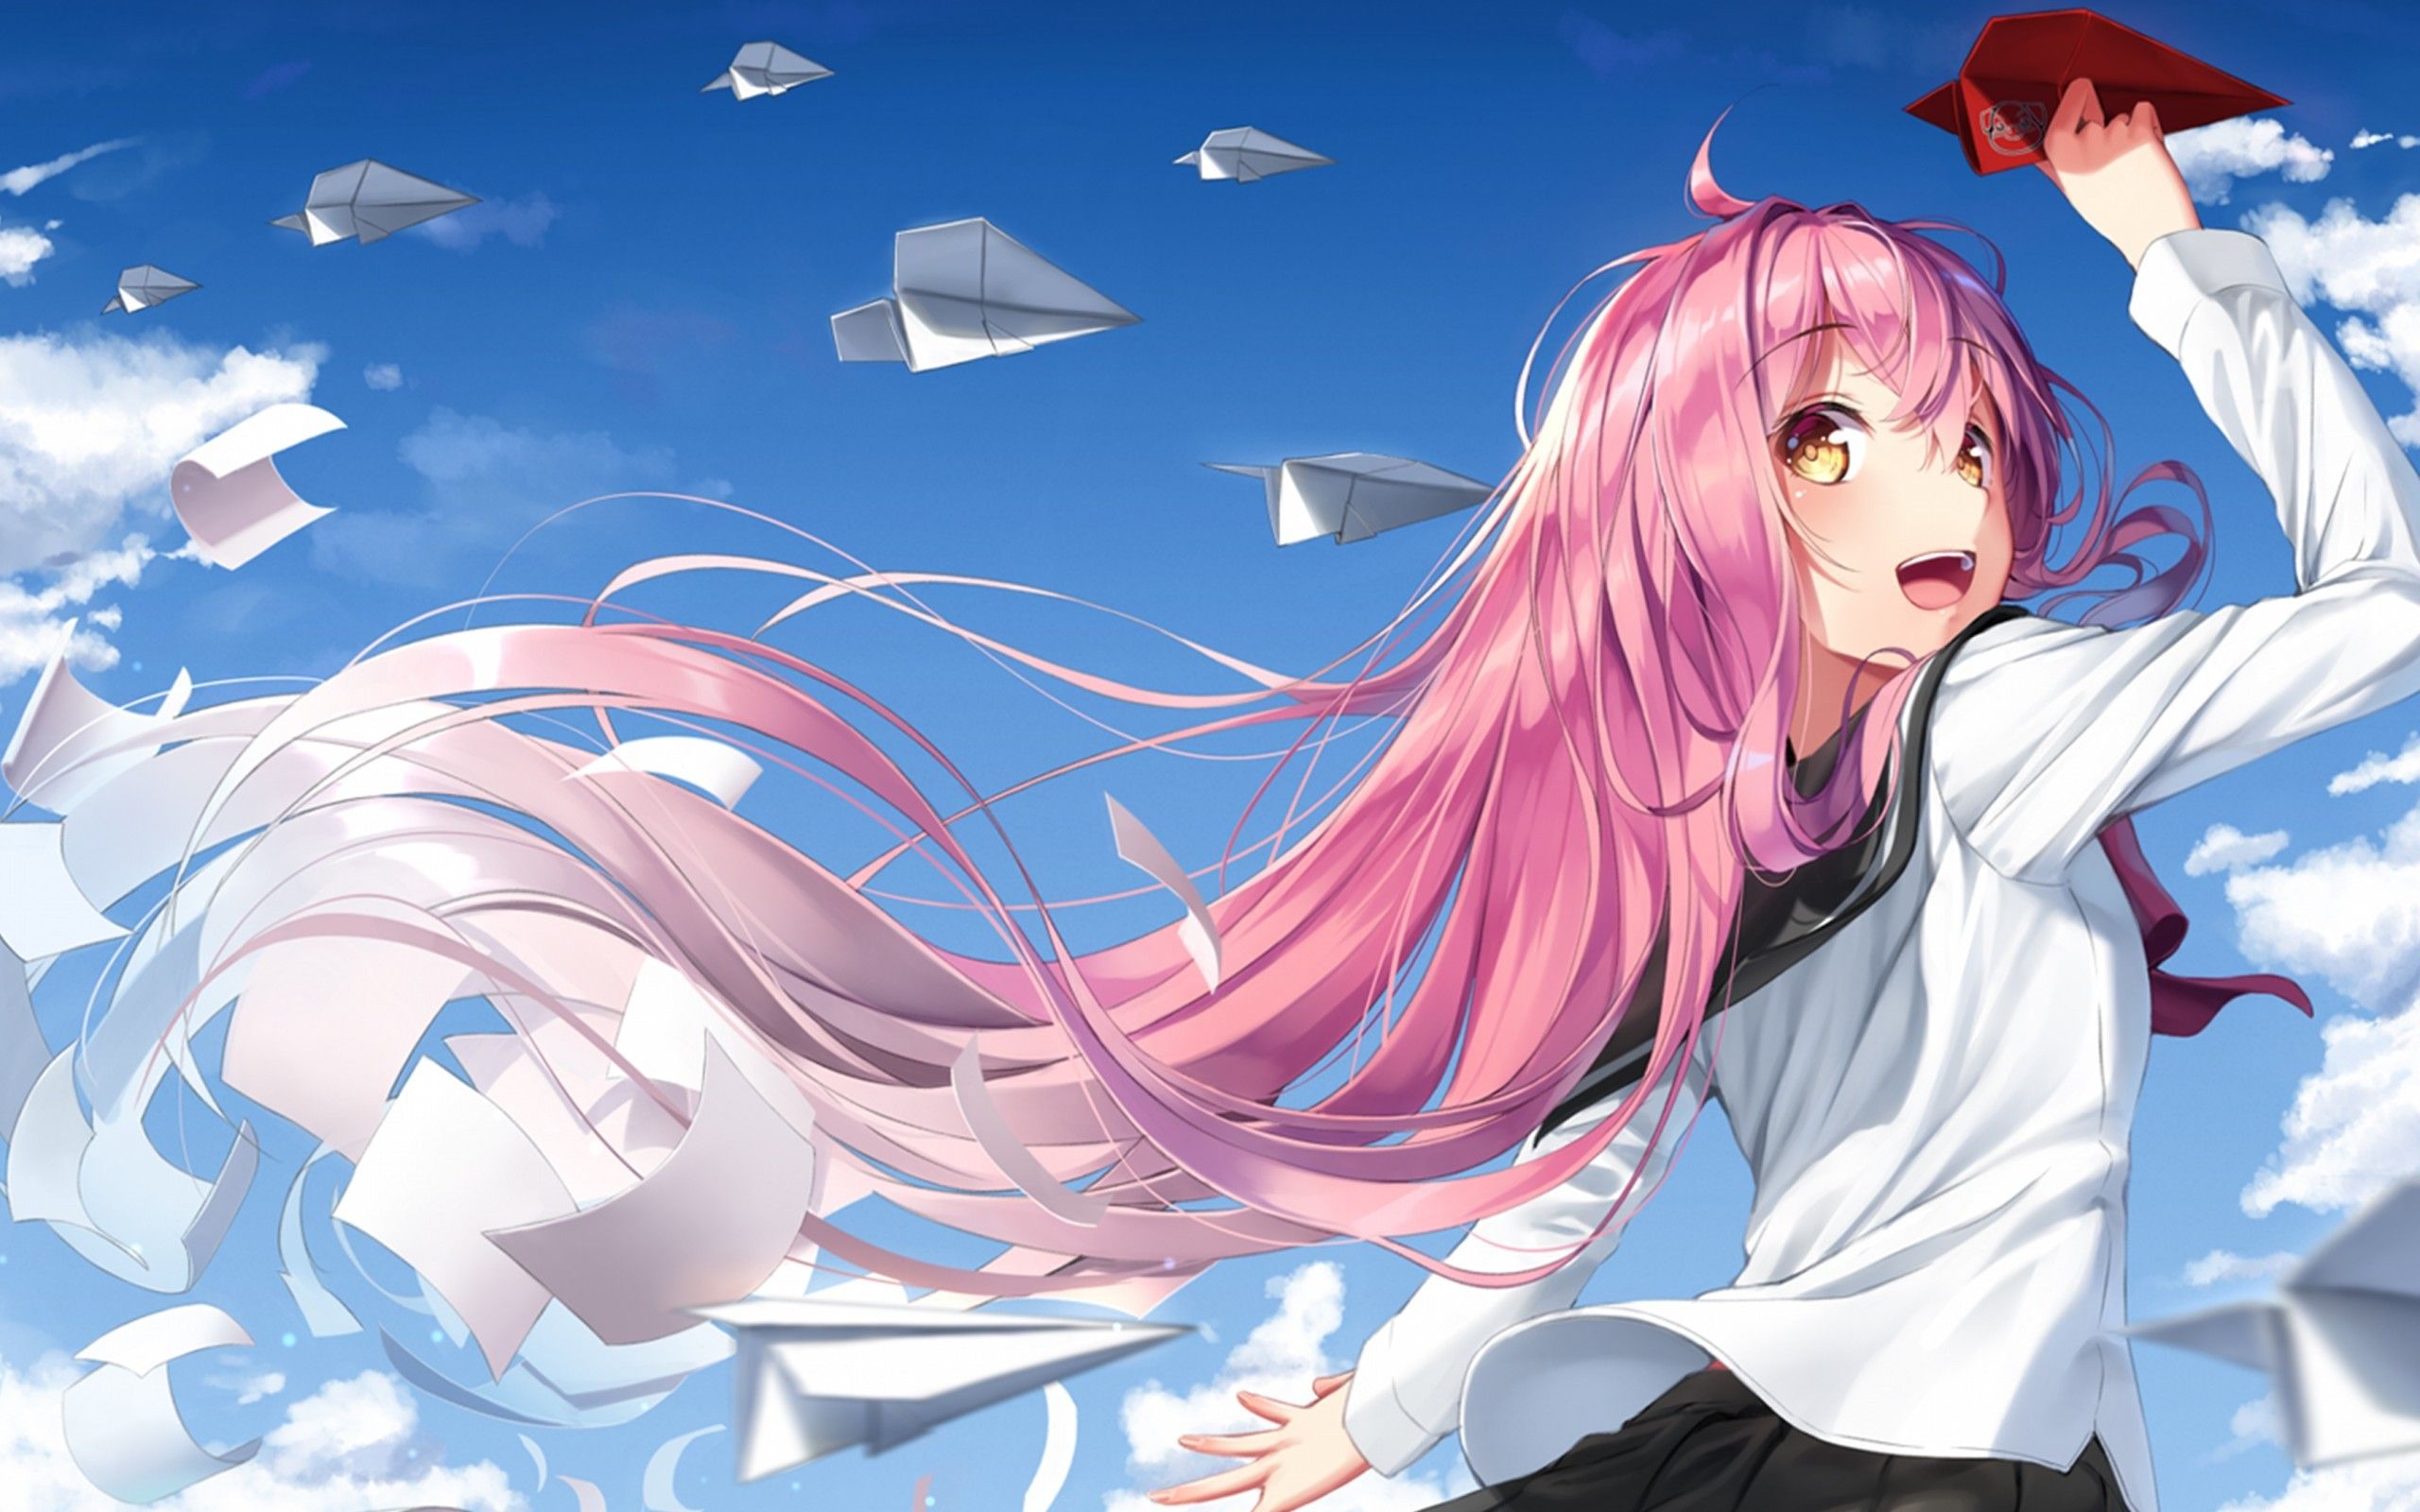 Download 2560x1600 Anime School Girl, Pink Hair, Clouds, Back View